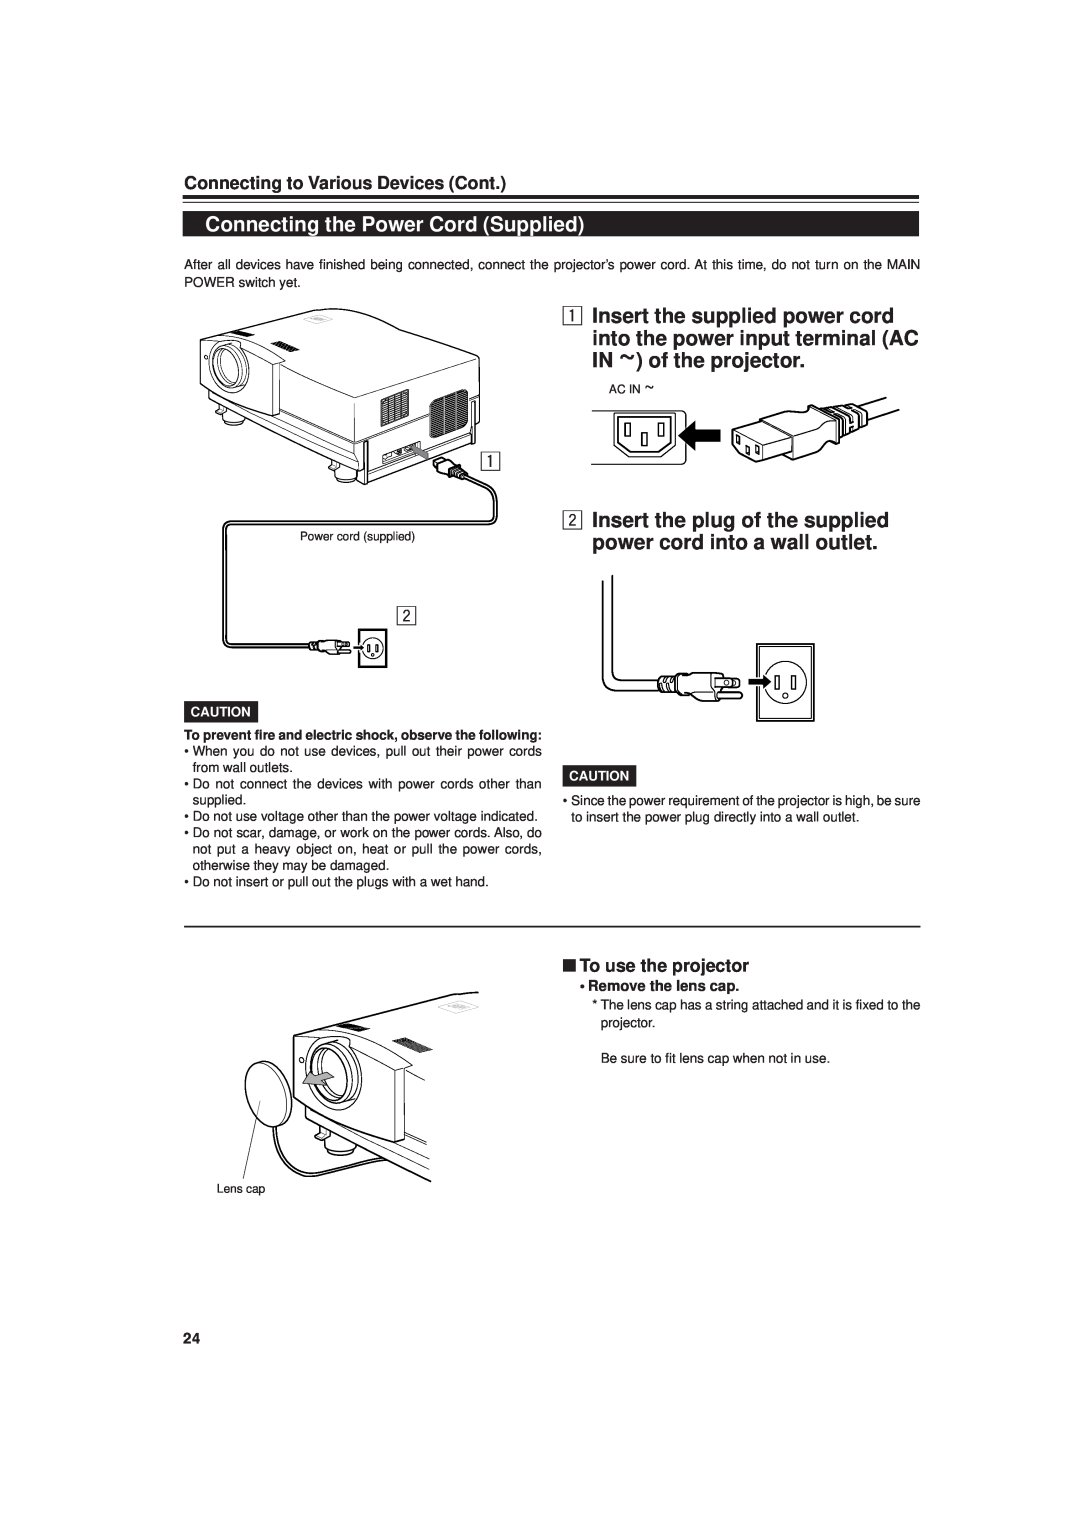 JVC DLA-G20U manual Connecting the Power Cord Supplied, Insert the supplied power cord, Connecting to Various Devices Cont 